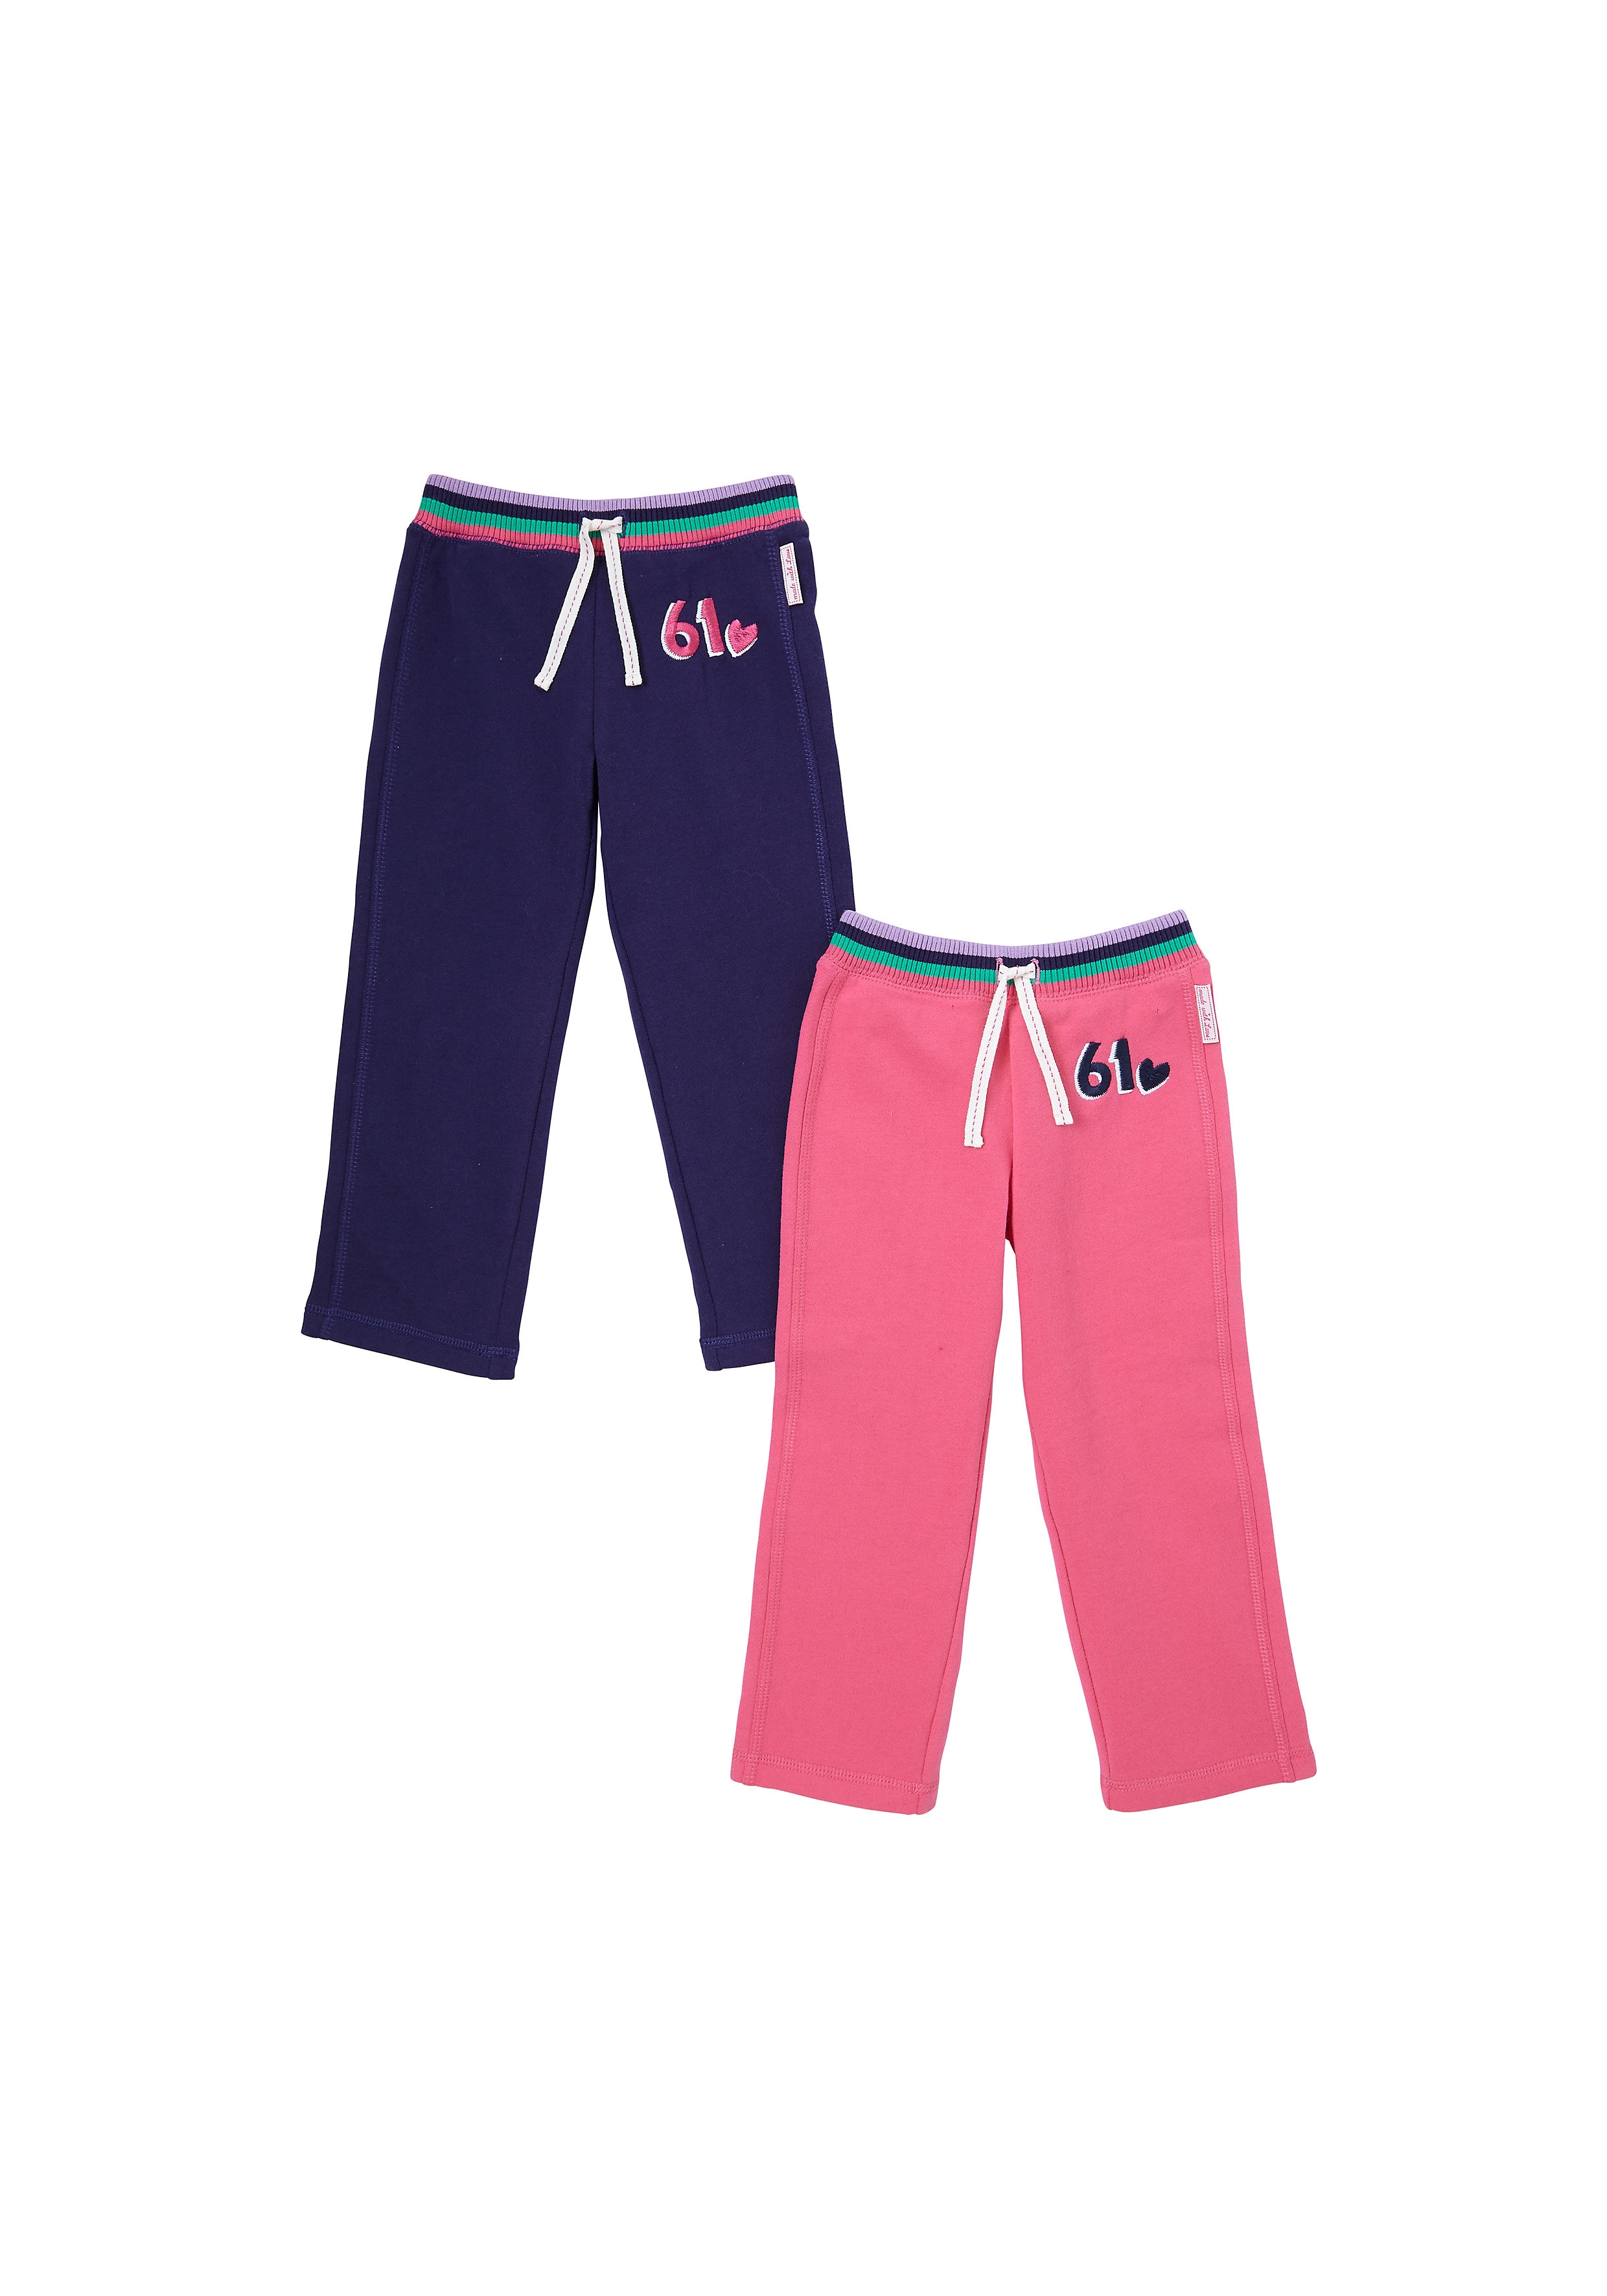 Mothercare | Girls Joggers - Pack of 2 - Navy